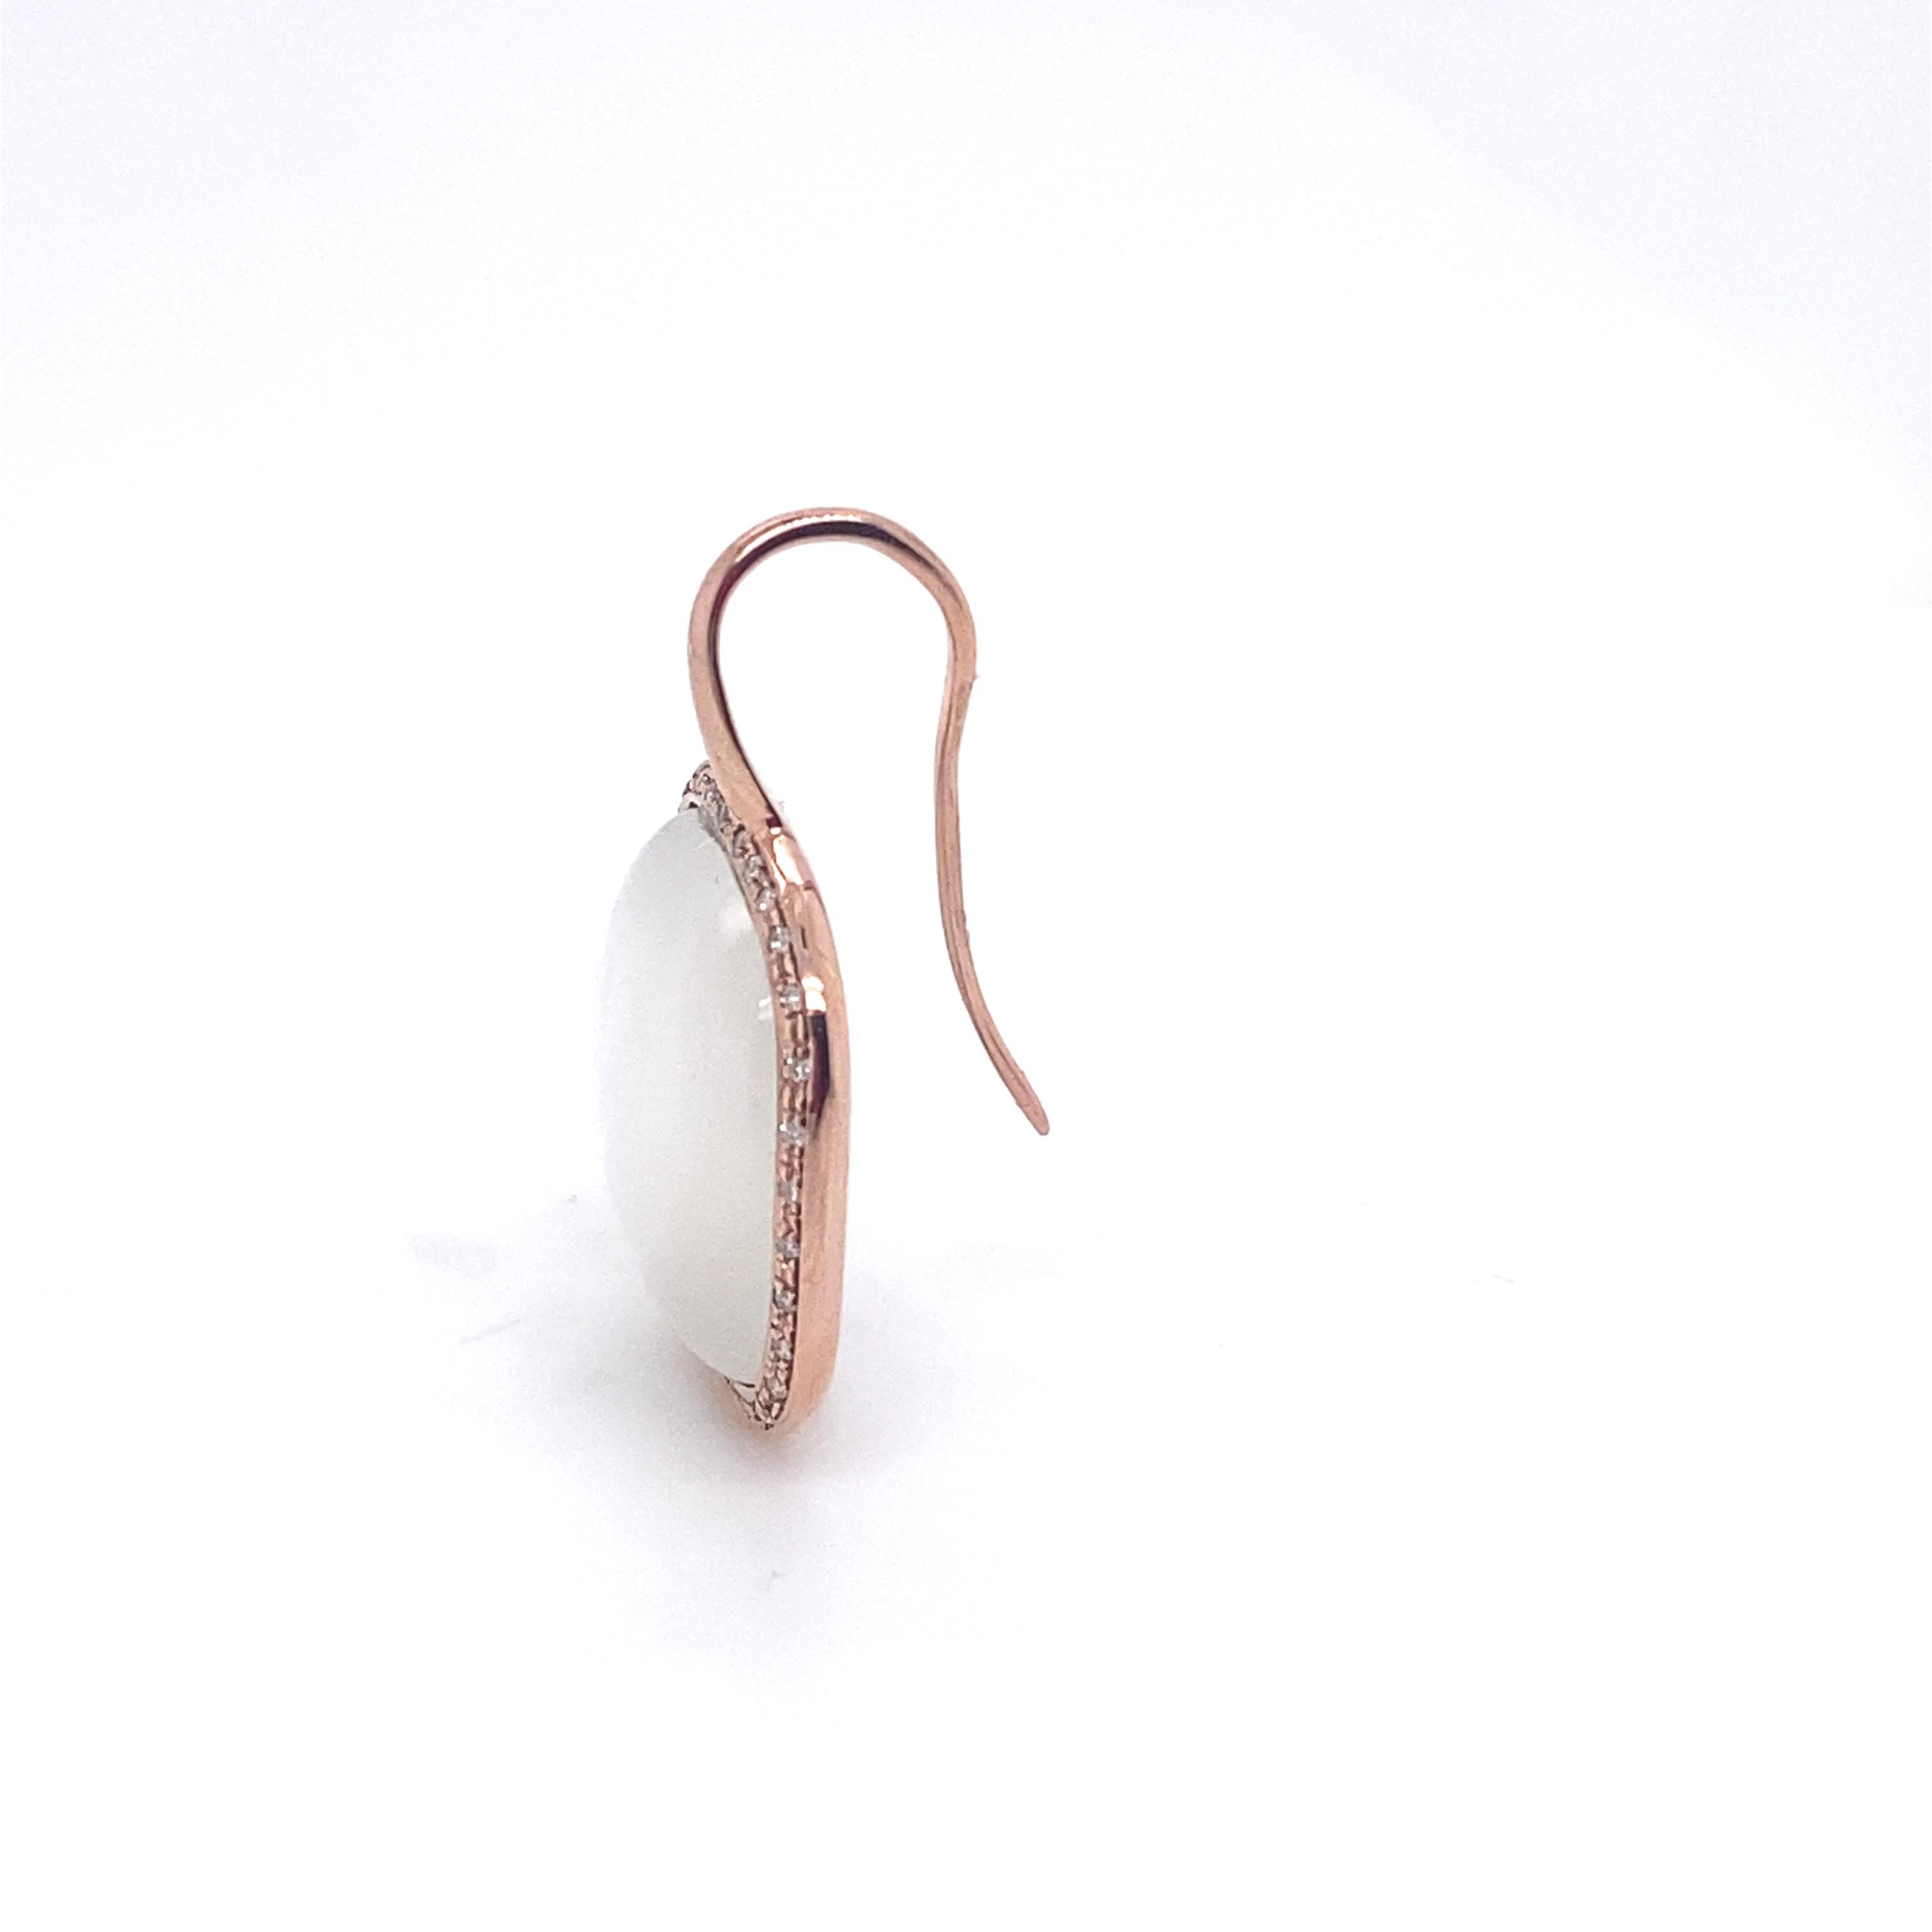 Artisan 18 Carat Pink Gold Earrings Adorned with a White Quartz Surrounded by Diamonds For Sale